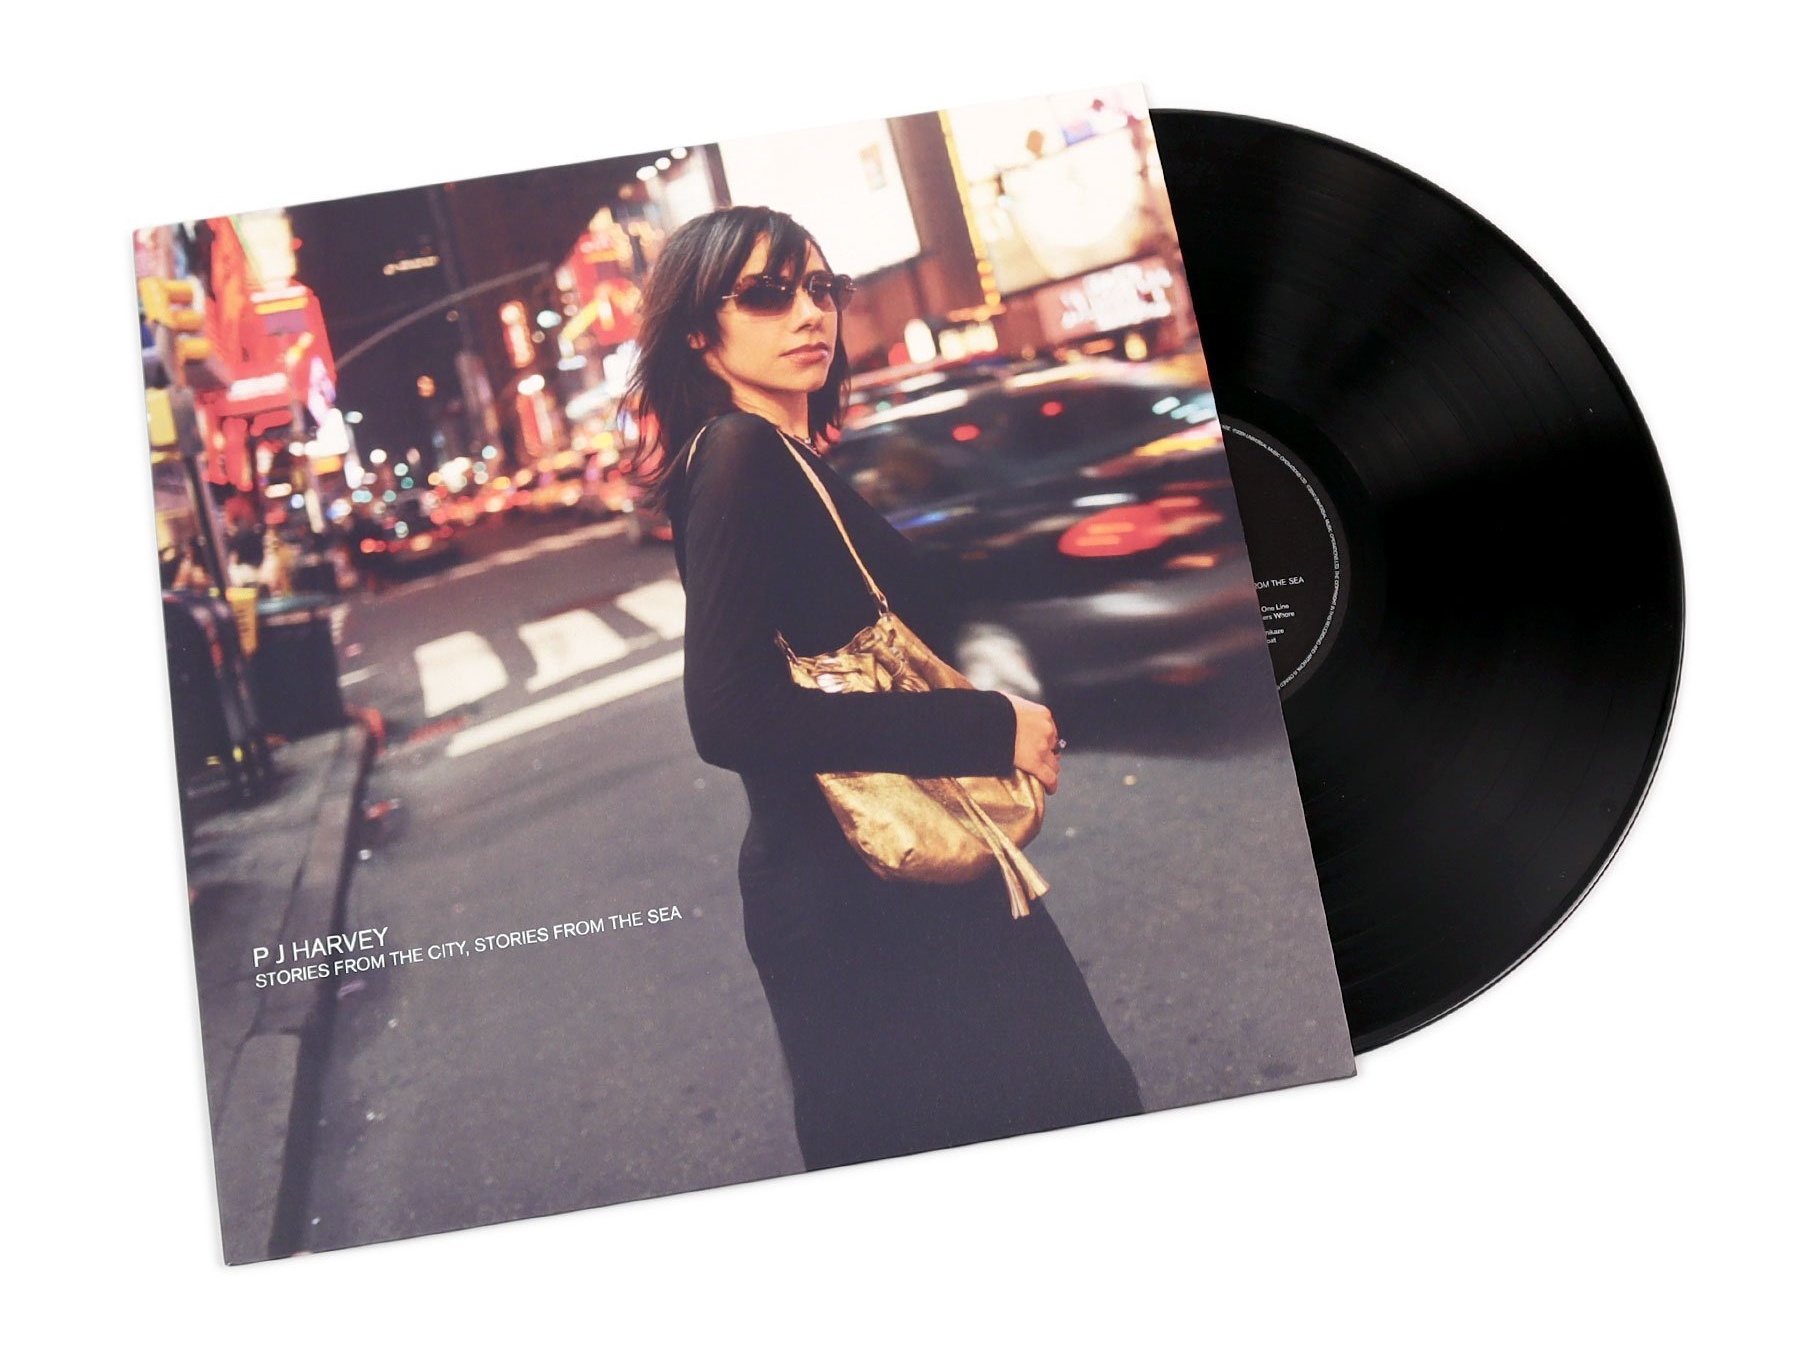 PJ Harvey - "Stories from the City, Stories from the Sea" vinyl LP